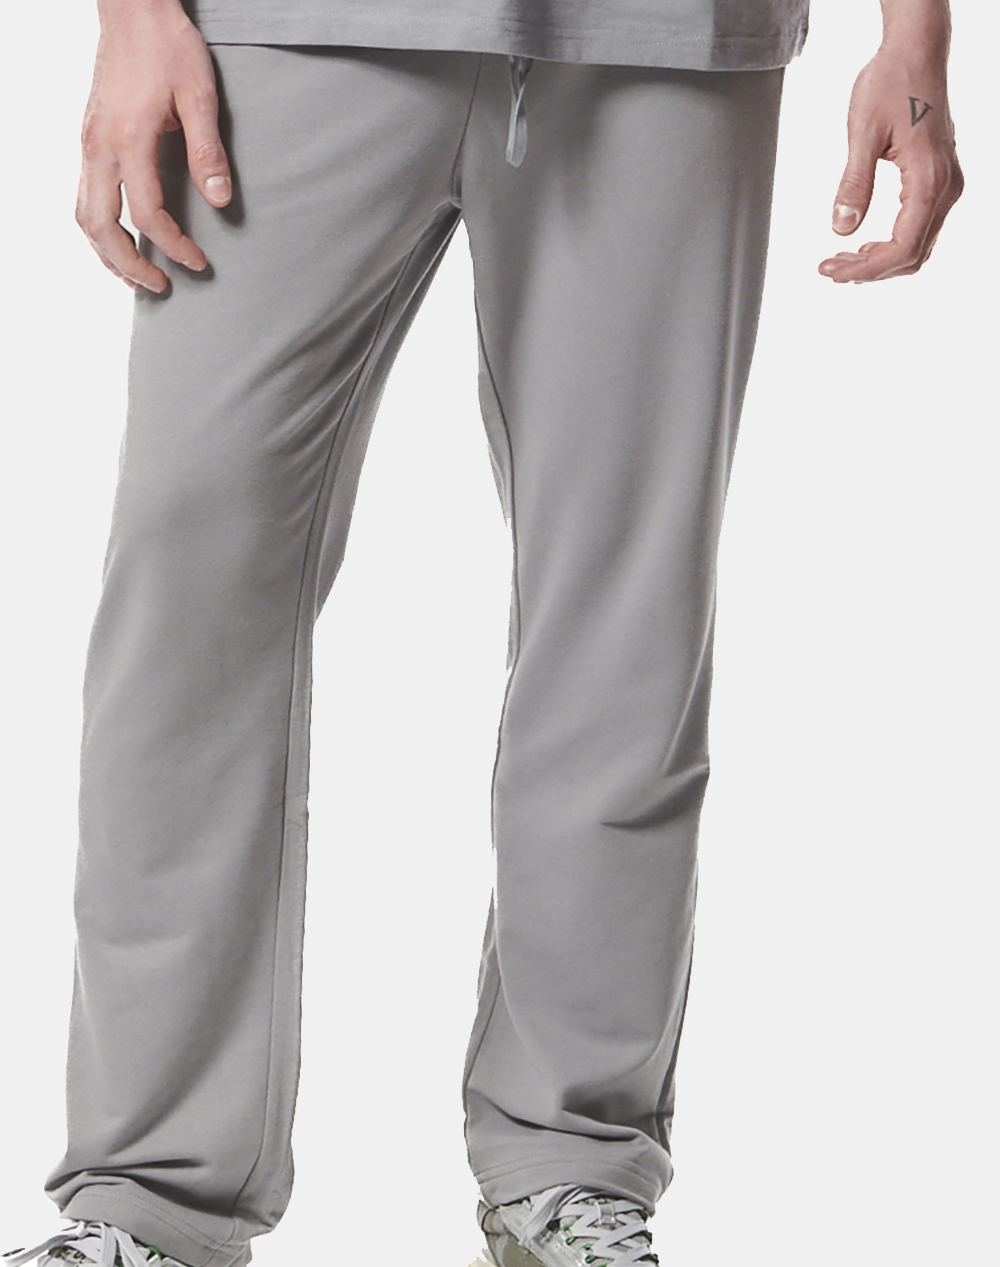 BODY ACTION MEN”S ESSENTIAL STRAIGHT SWEATPANTS W/ZIPPERS 023430-01-SILVER GREY LightGray